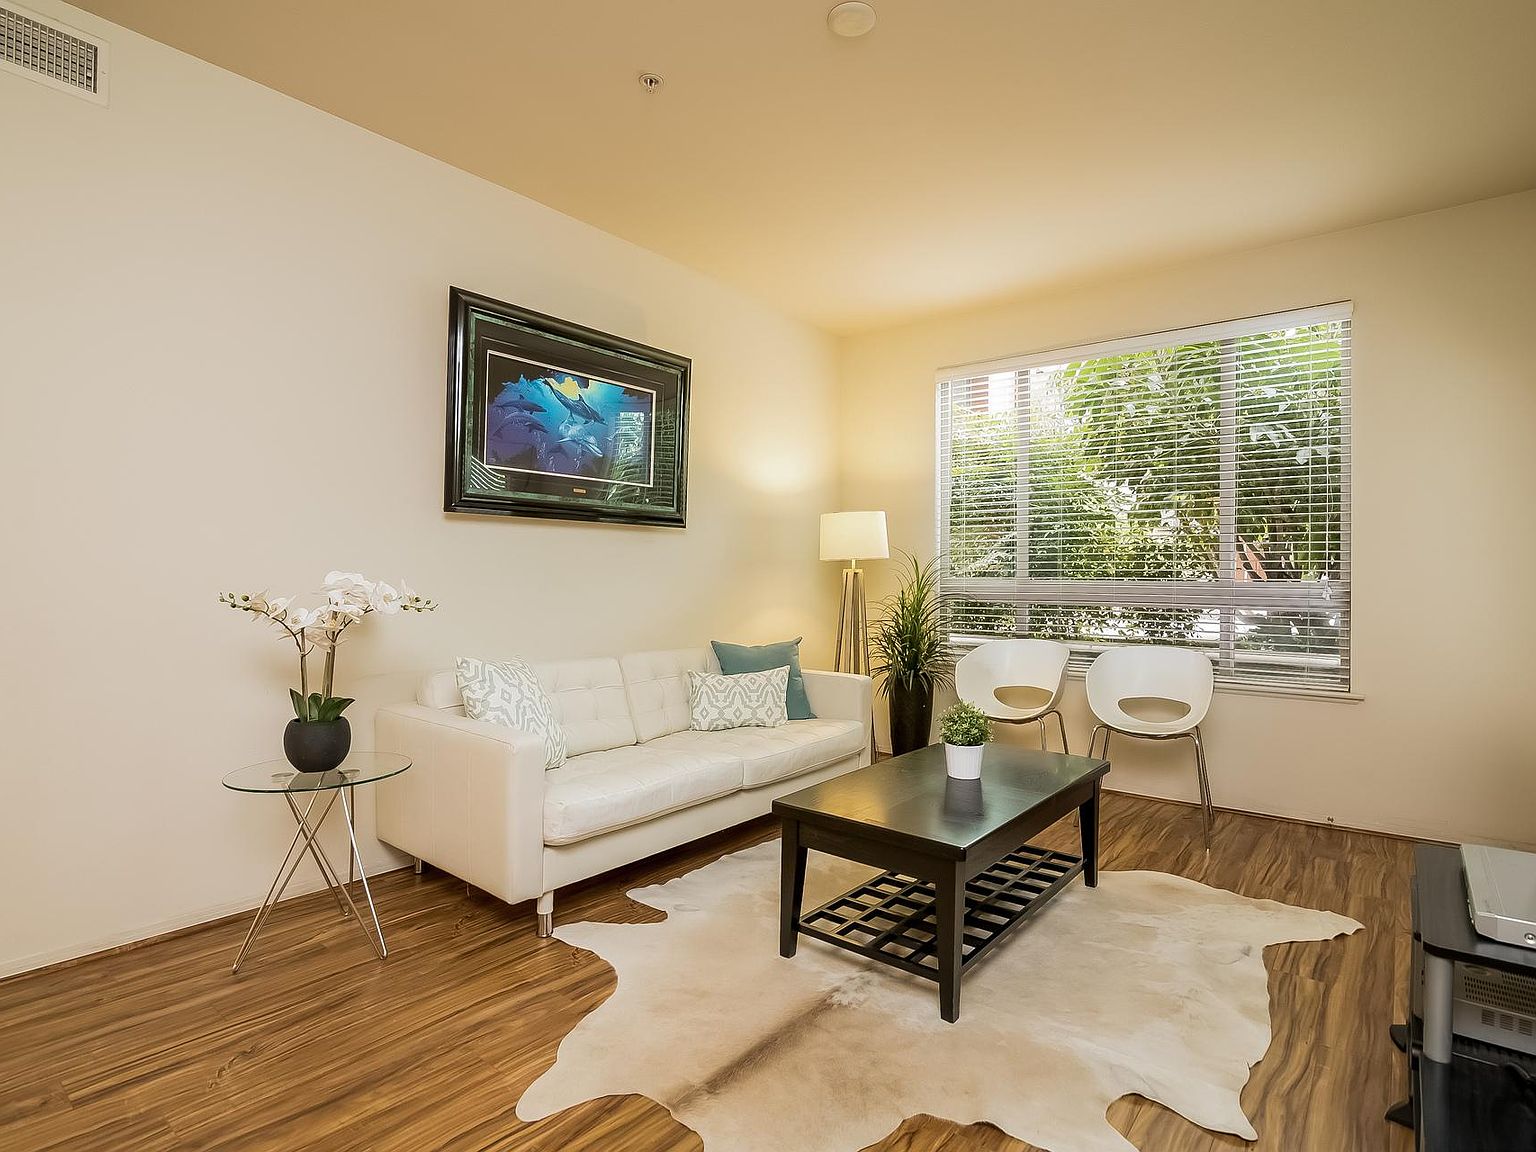 100 S Alameda St Unit 167 Los Angeles Ca 90012 Zillow 🏡 getting real about real estate ➡️ helping you move forward 🔎 show us how you're #zillowing zlw.re/weekendprojects. zillow